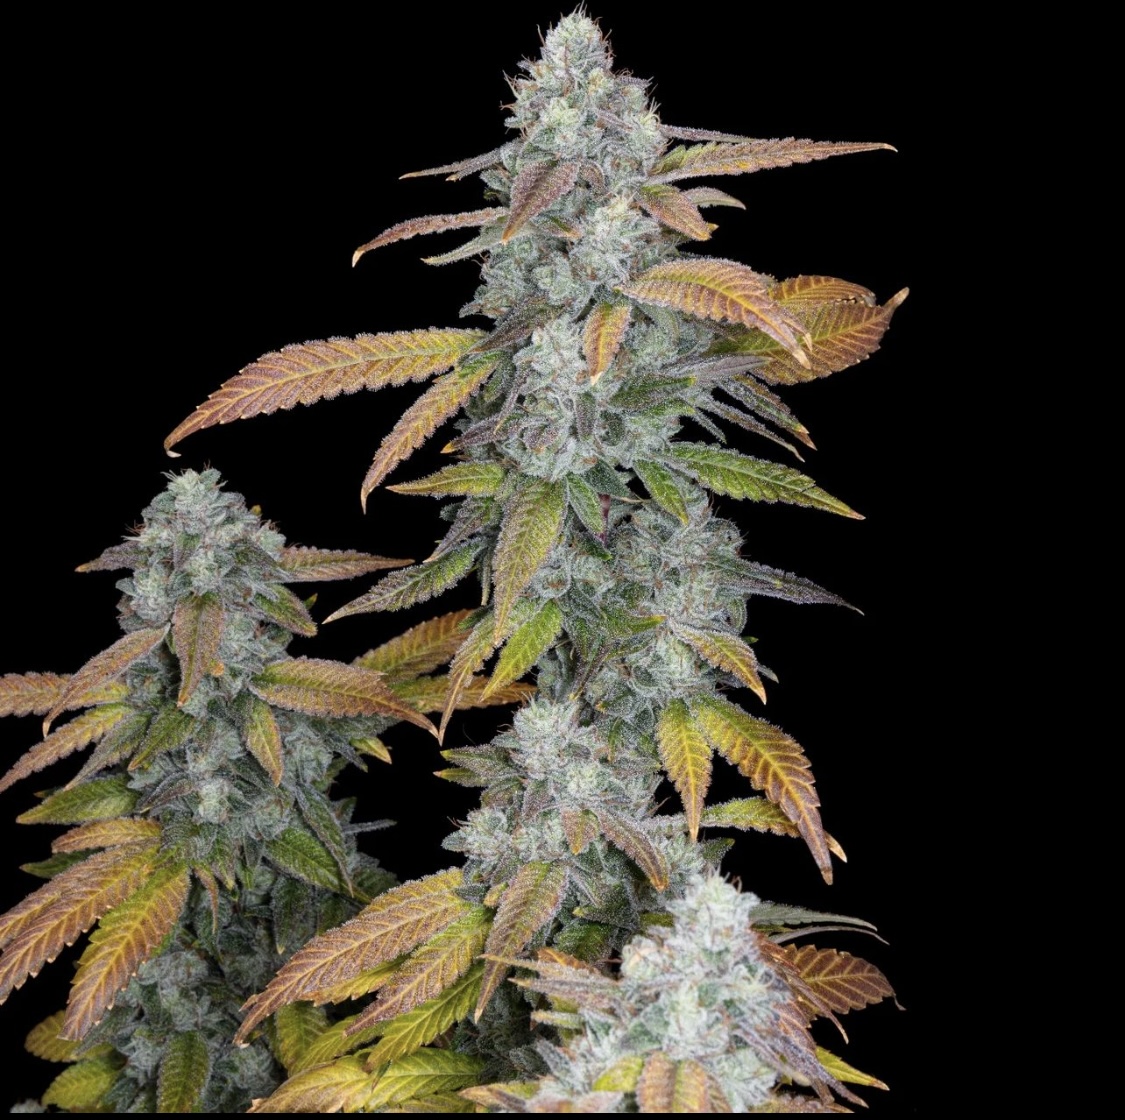 Romulan S1
Bred AND Cultivated by 
@romulangenetics